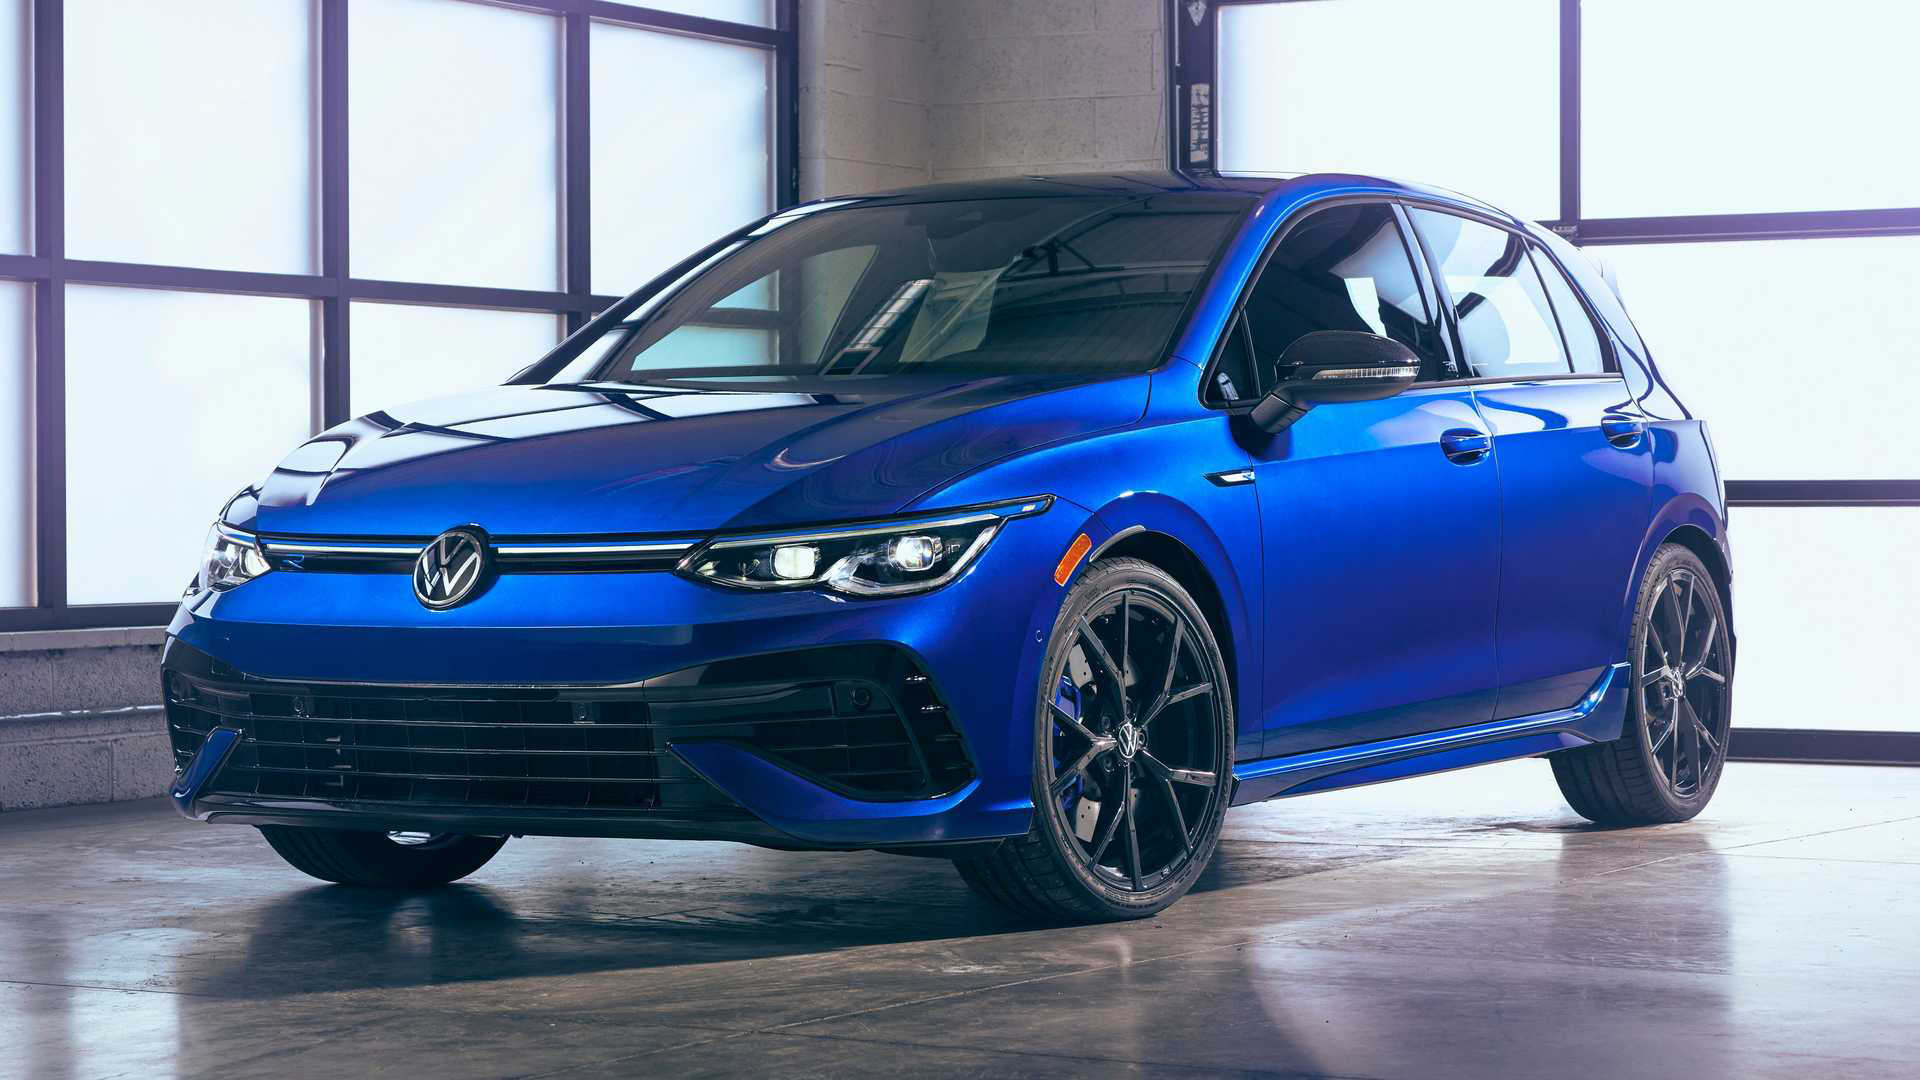 VW Golf R 20th Anniversary Edition Arrives This Fall For North America